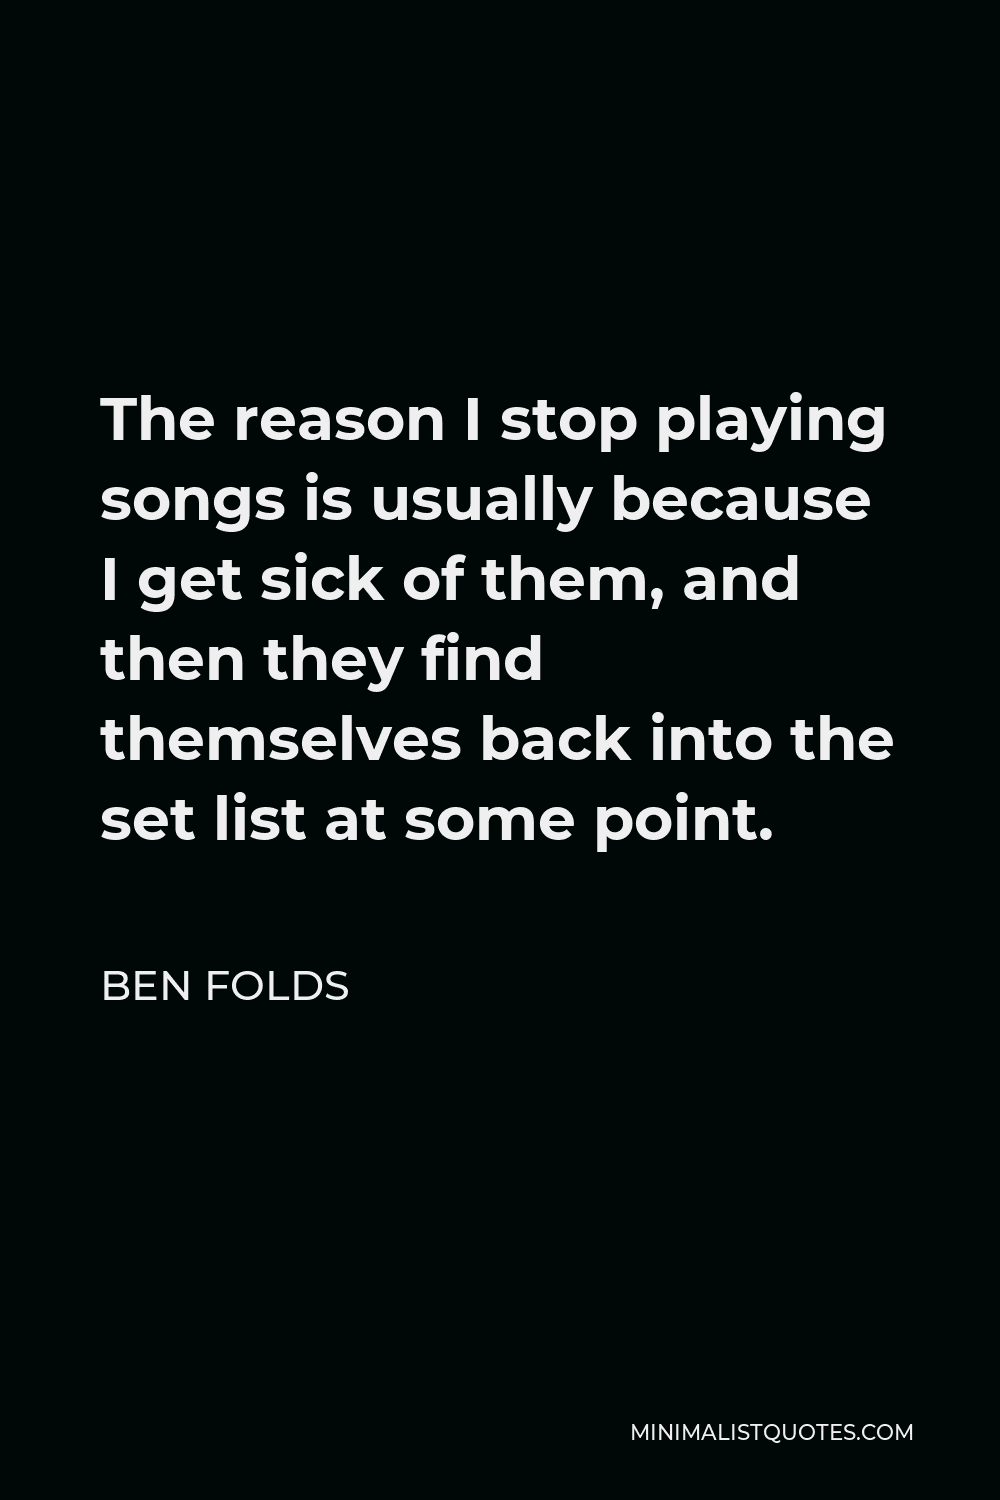 Ben Folds Quote - The reason I stop playing songs is usually because I get sick of them, and then they find themselves back into the set list at some point.